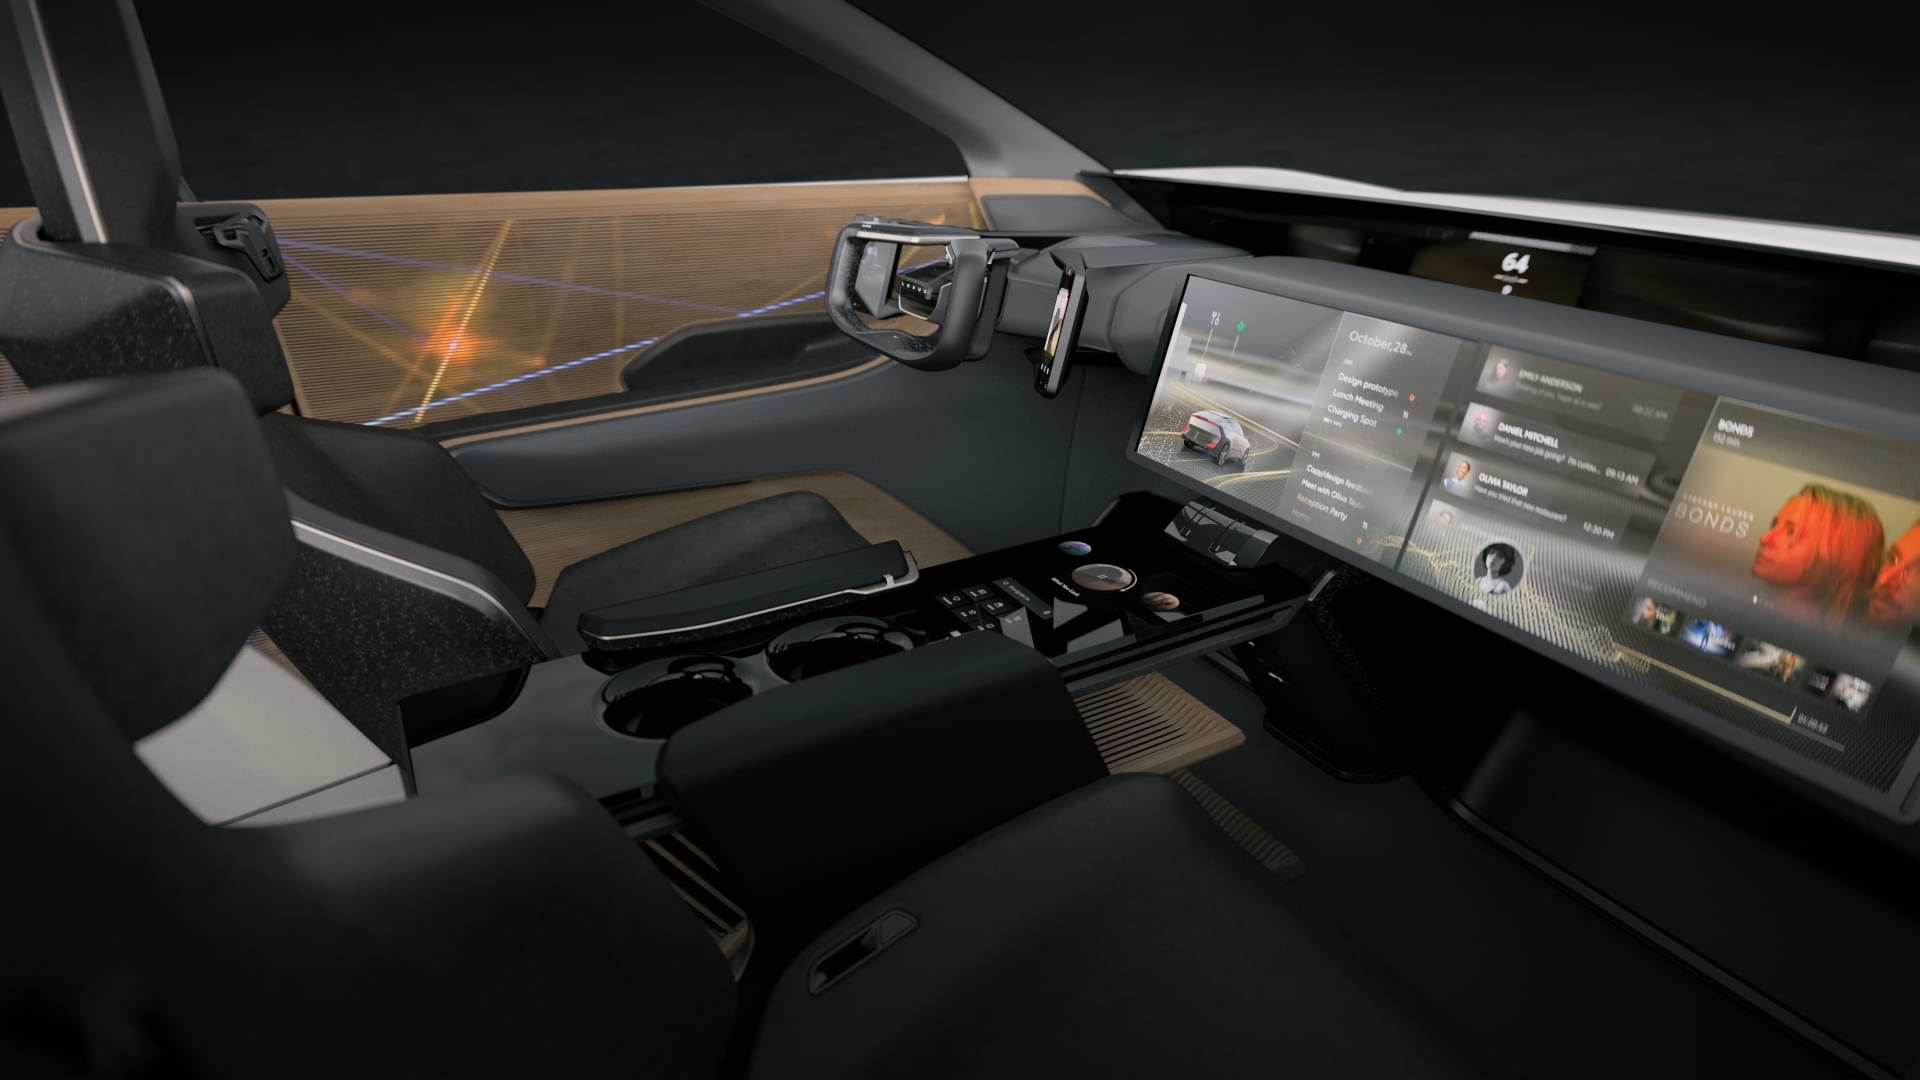 Top view of car interior, focusing on display dashboard.